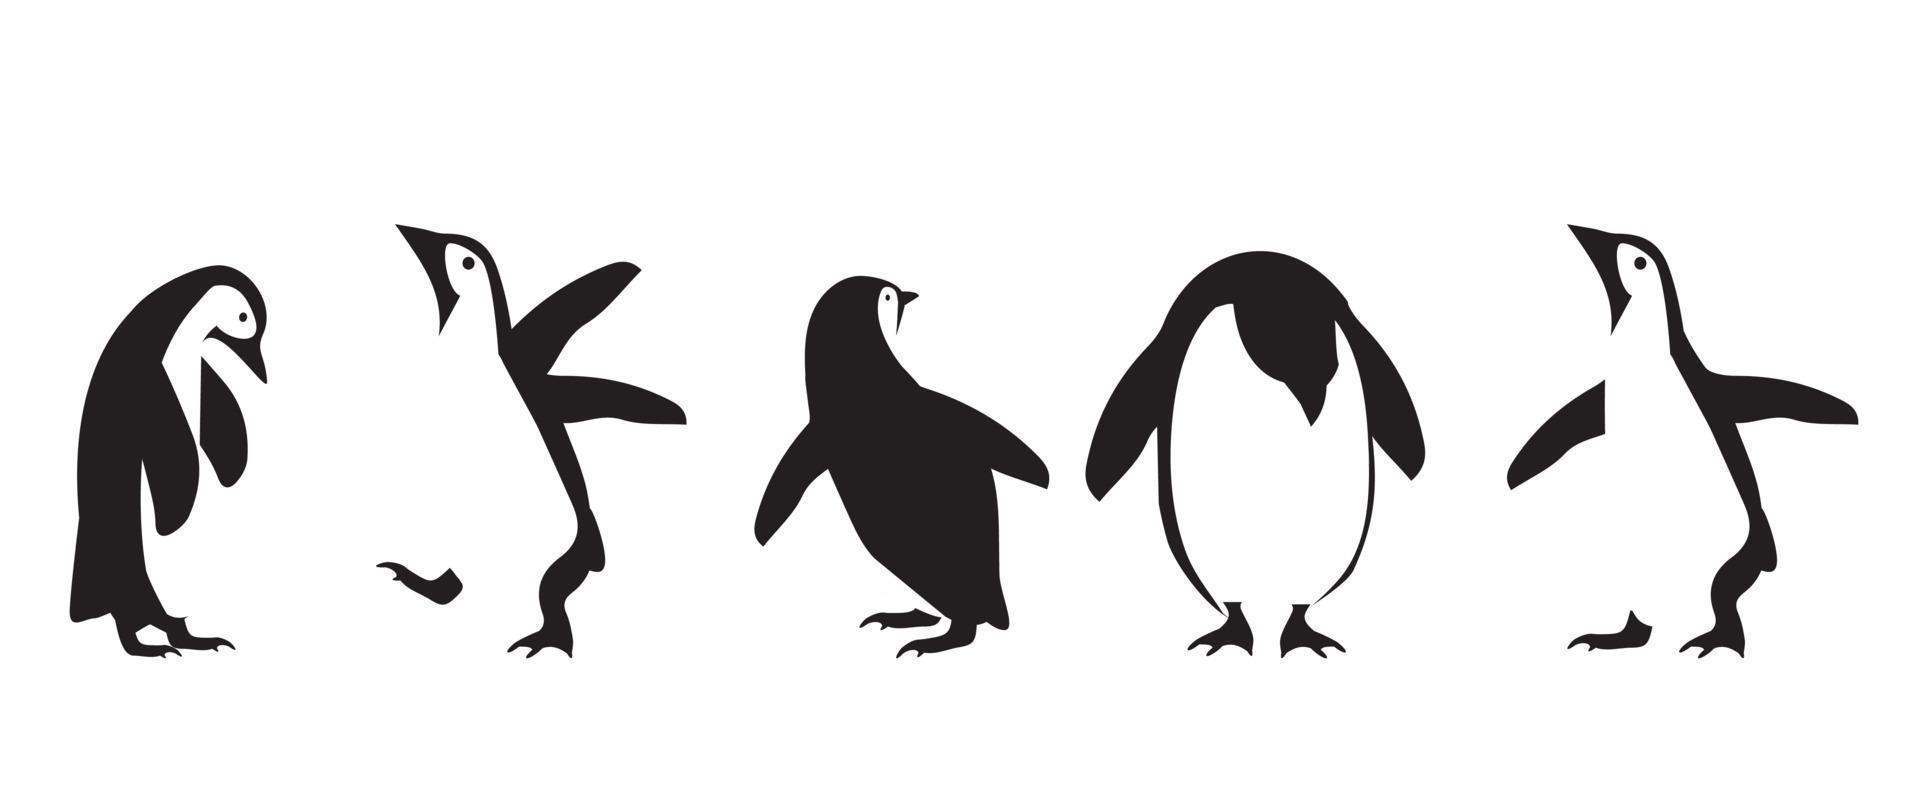 penguin icon in different poses set vector